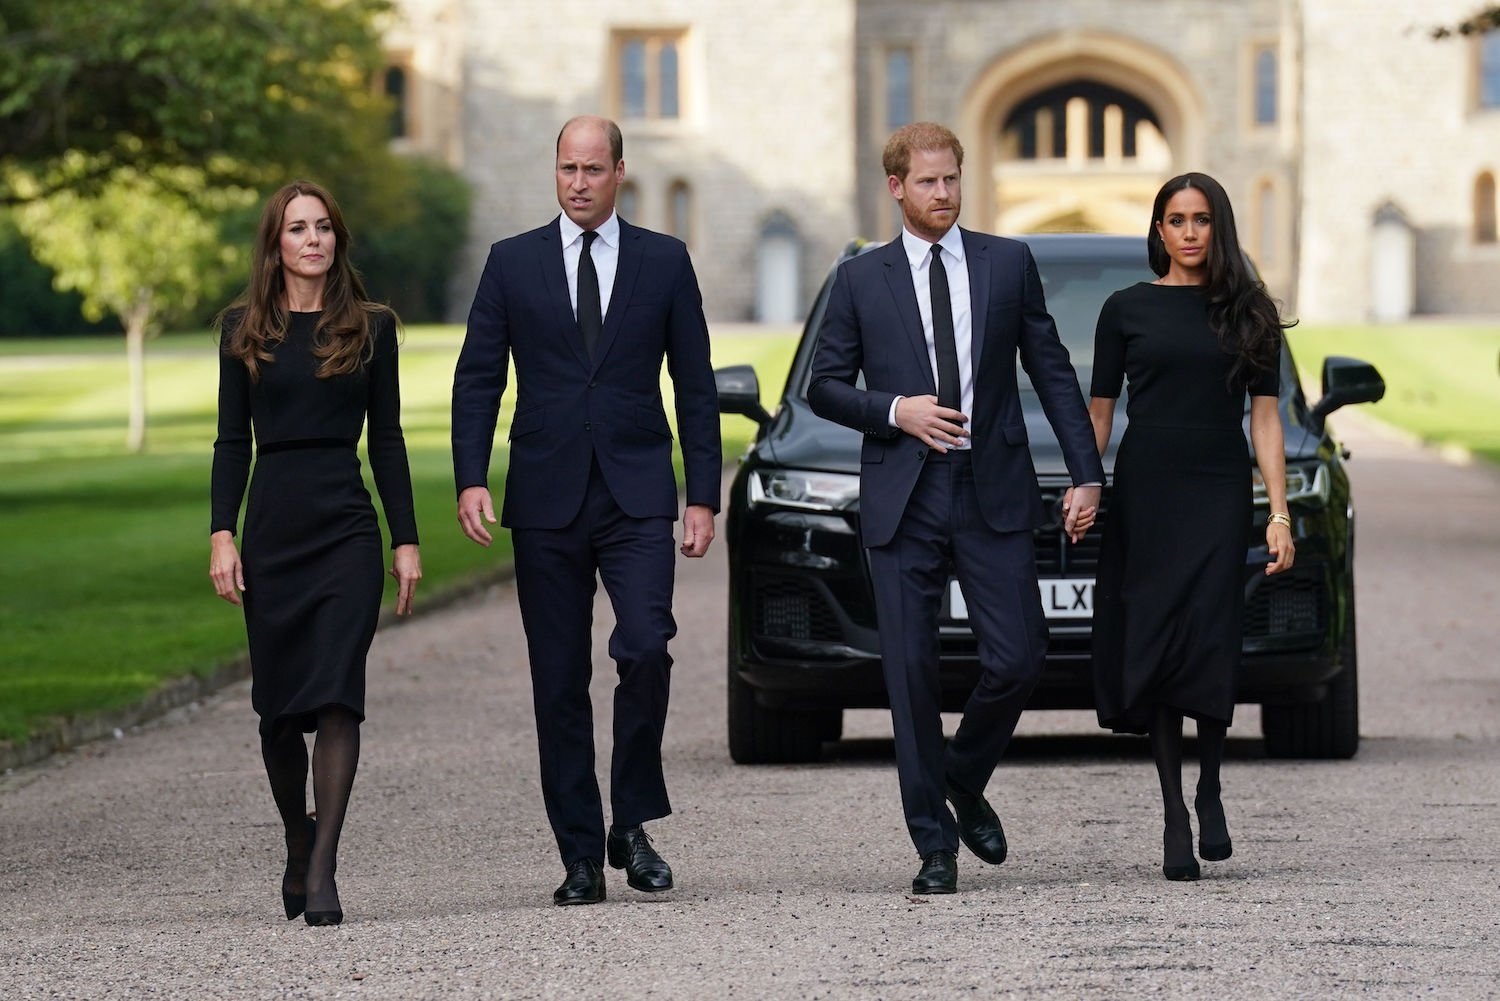 Kate Middleton, Prince William, Prince Harry, and Meghan Markle body language analysis for their appearance at Windsor Castle following Queen Elizabeth death